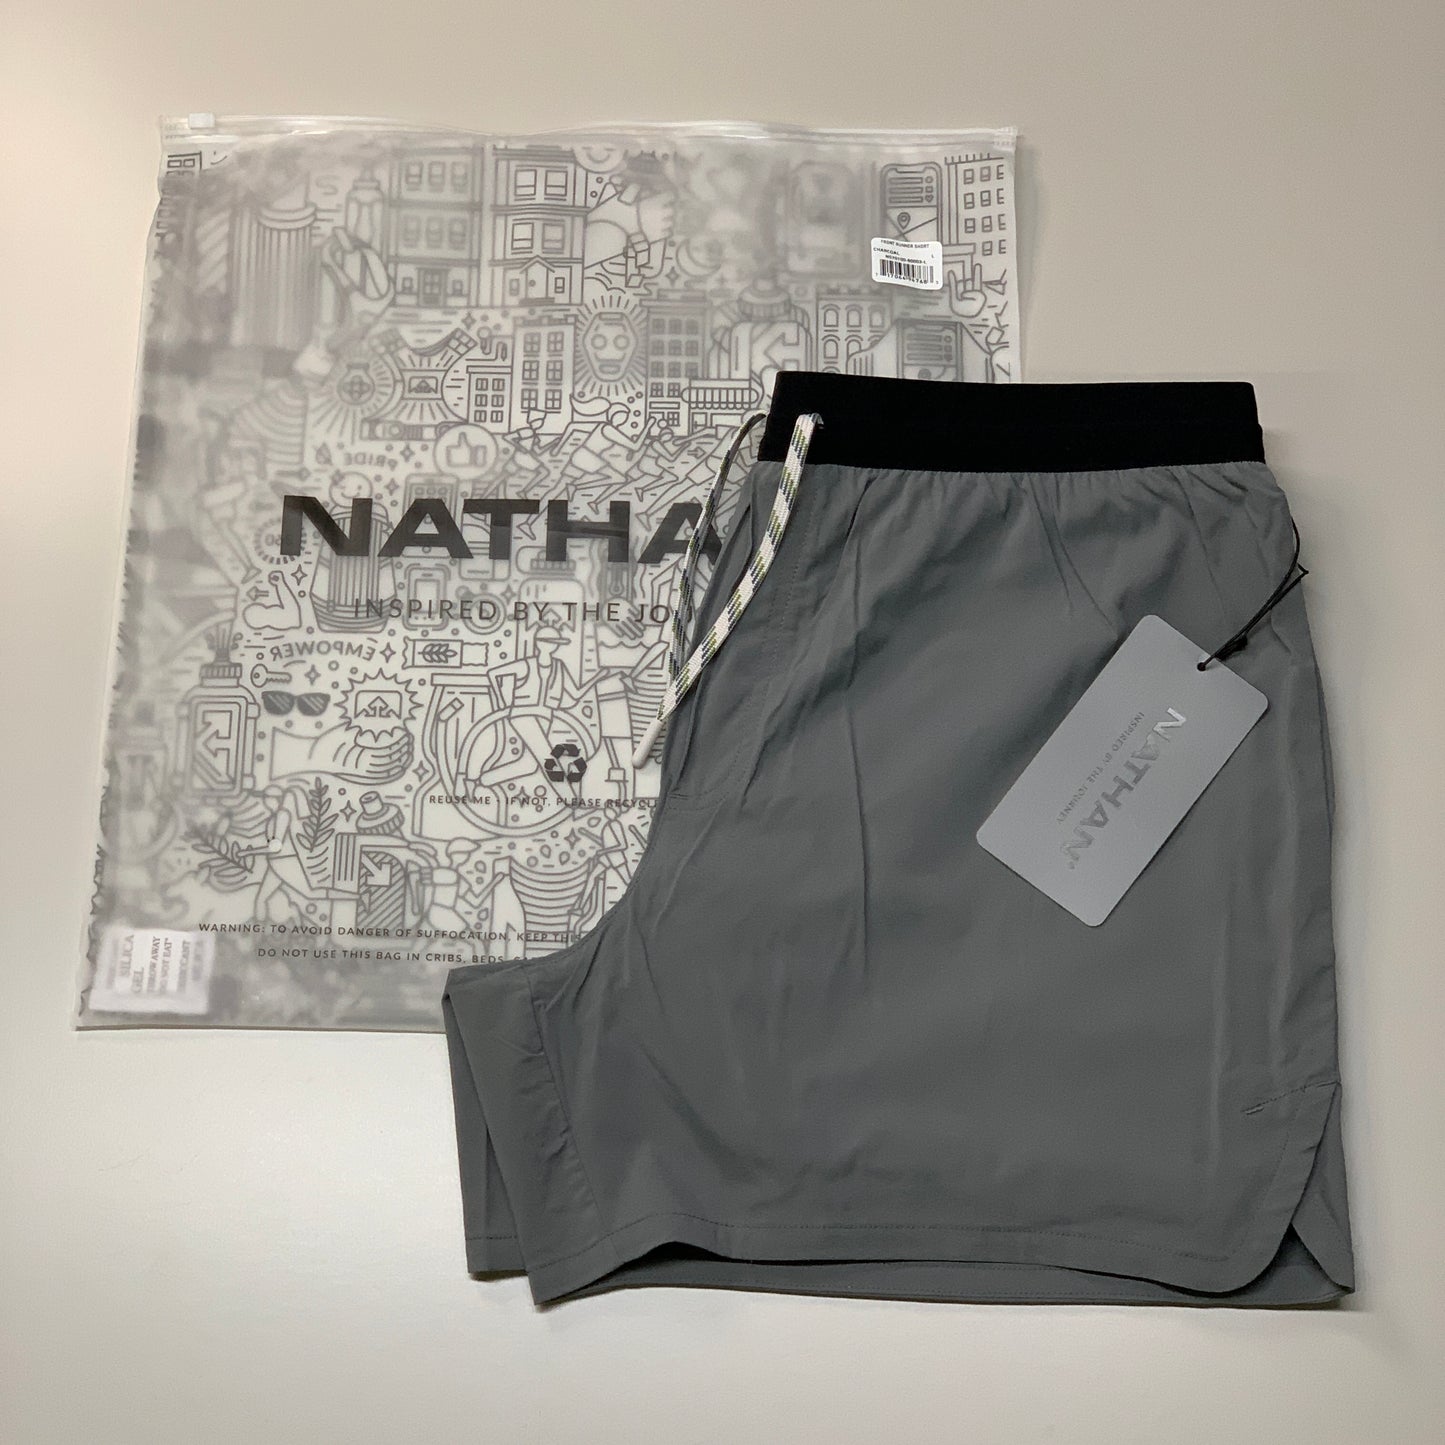 NATHAN Front Runner Shorts 5" Inseam Men's Charcoal Size Large NS70100-80003-L